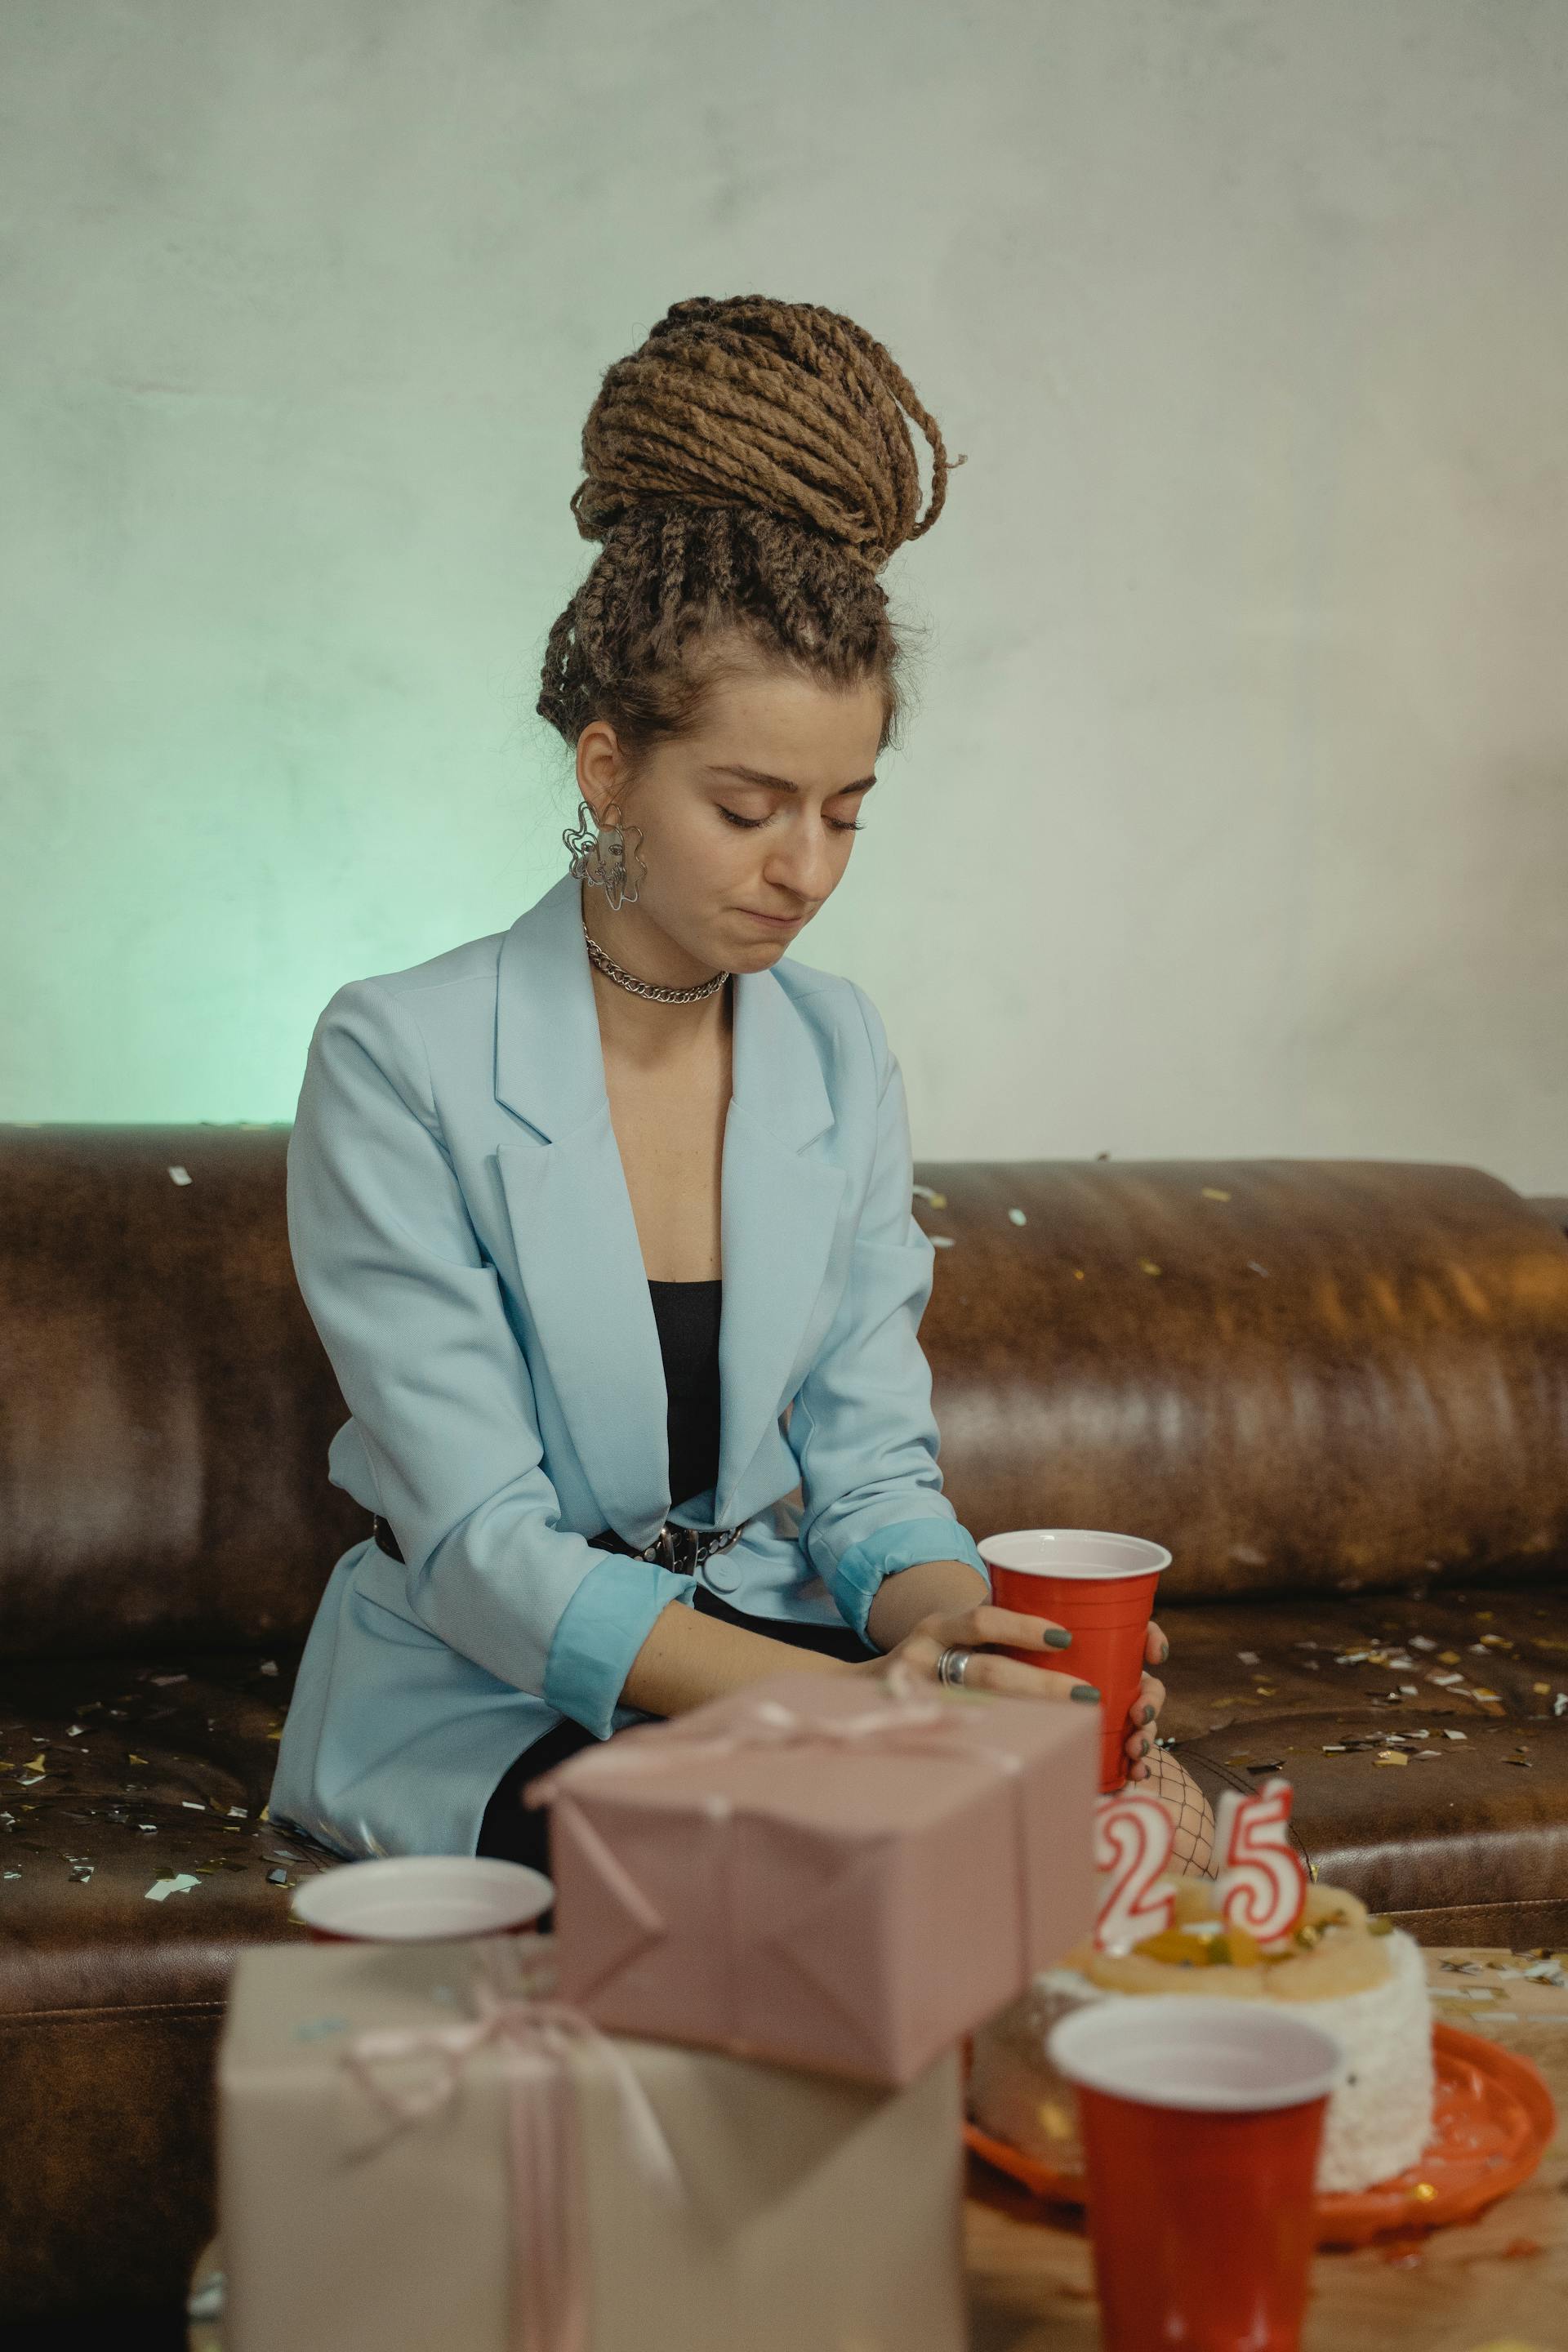 A woman sitting alone next to a birthday cake and presents | Source: Pexels